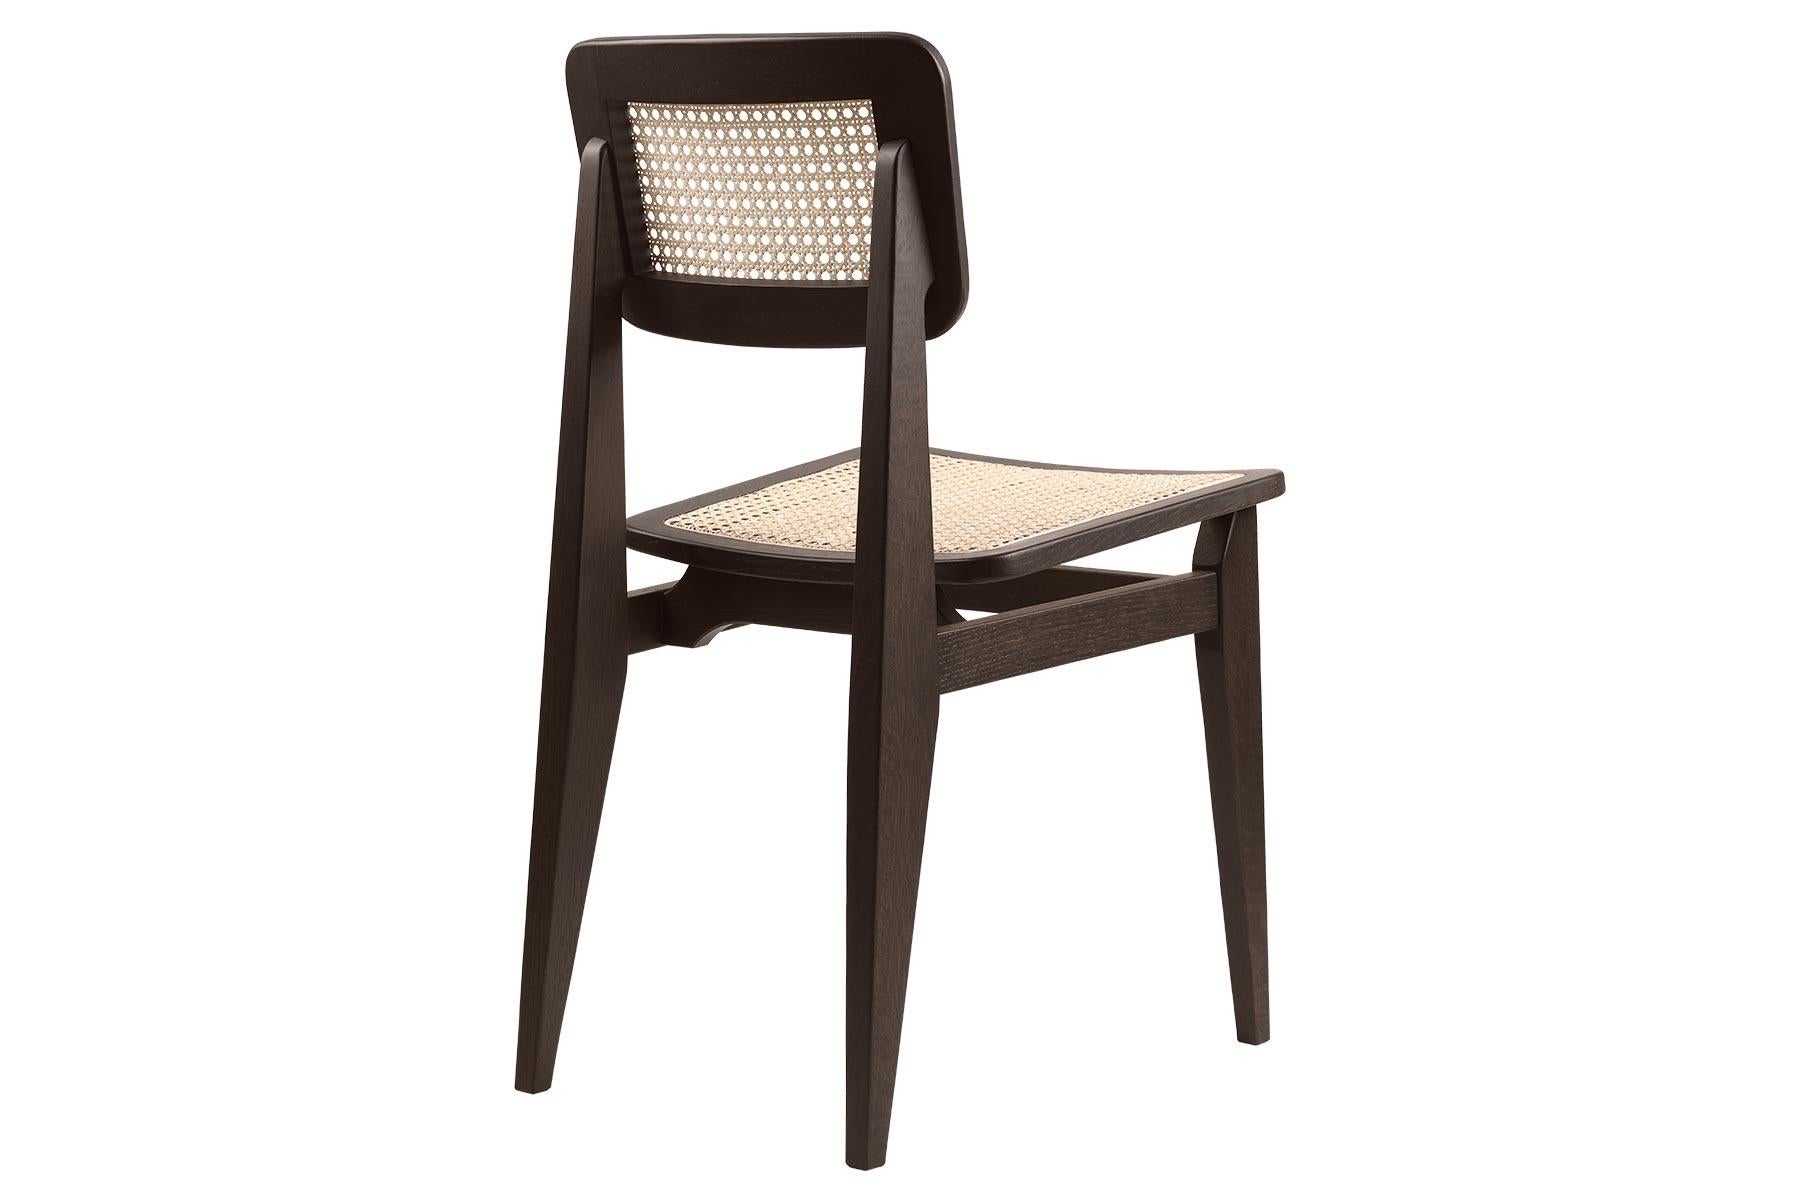 Danish C-Chair Dining Chair, French Cane, Walnut For Sale